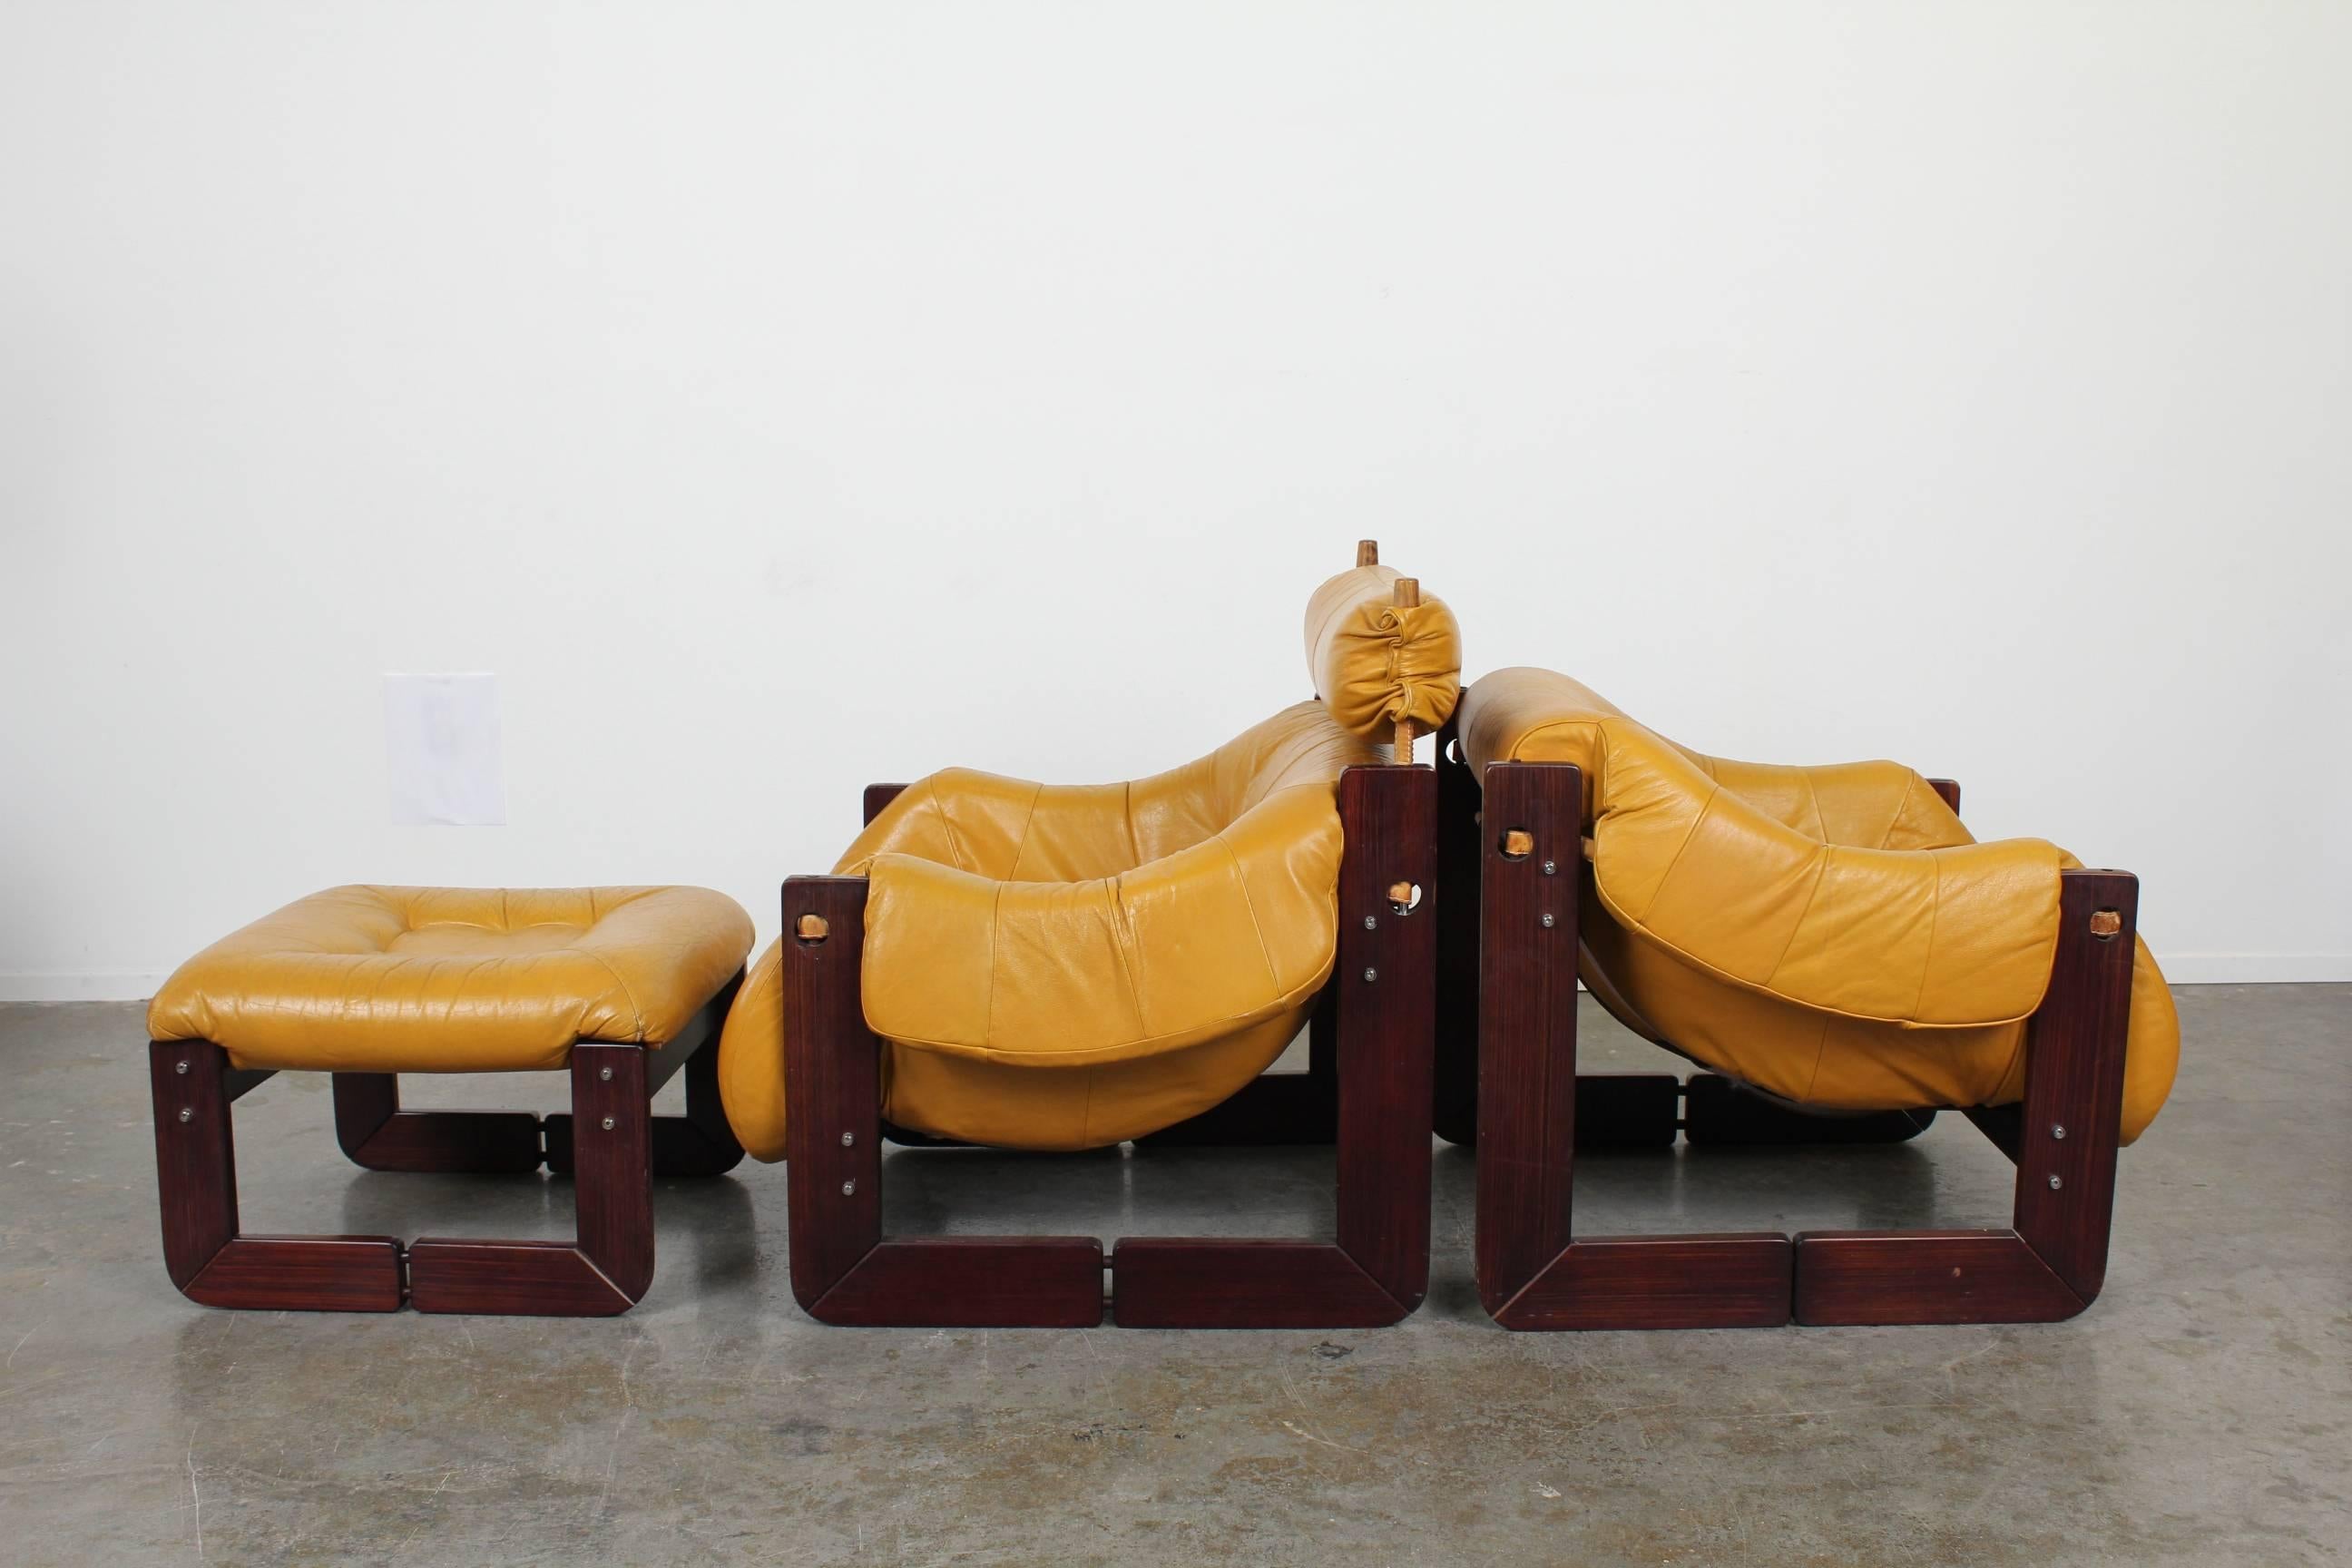 Pair of fantastic vintage lounge chairs and ottoman by Percival Lafer with  Brazilian rosewood and original vintage camel colored leather. Really unique design and construction make this a true statement piece.